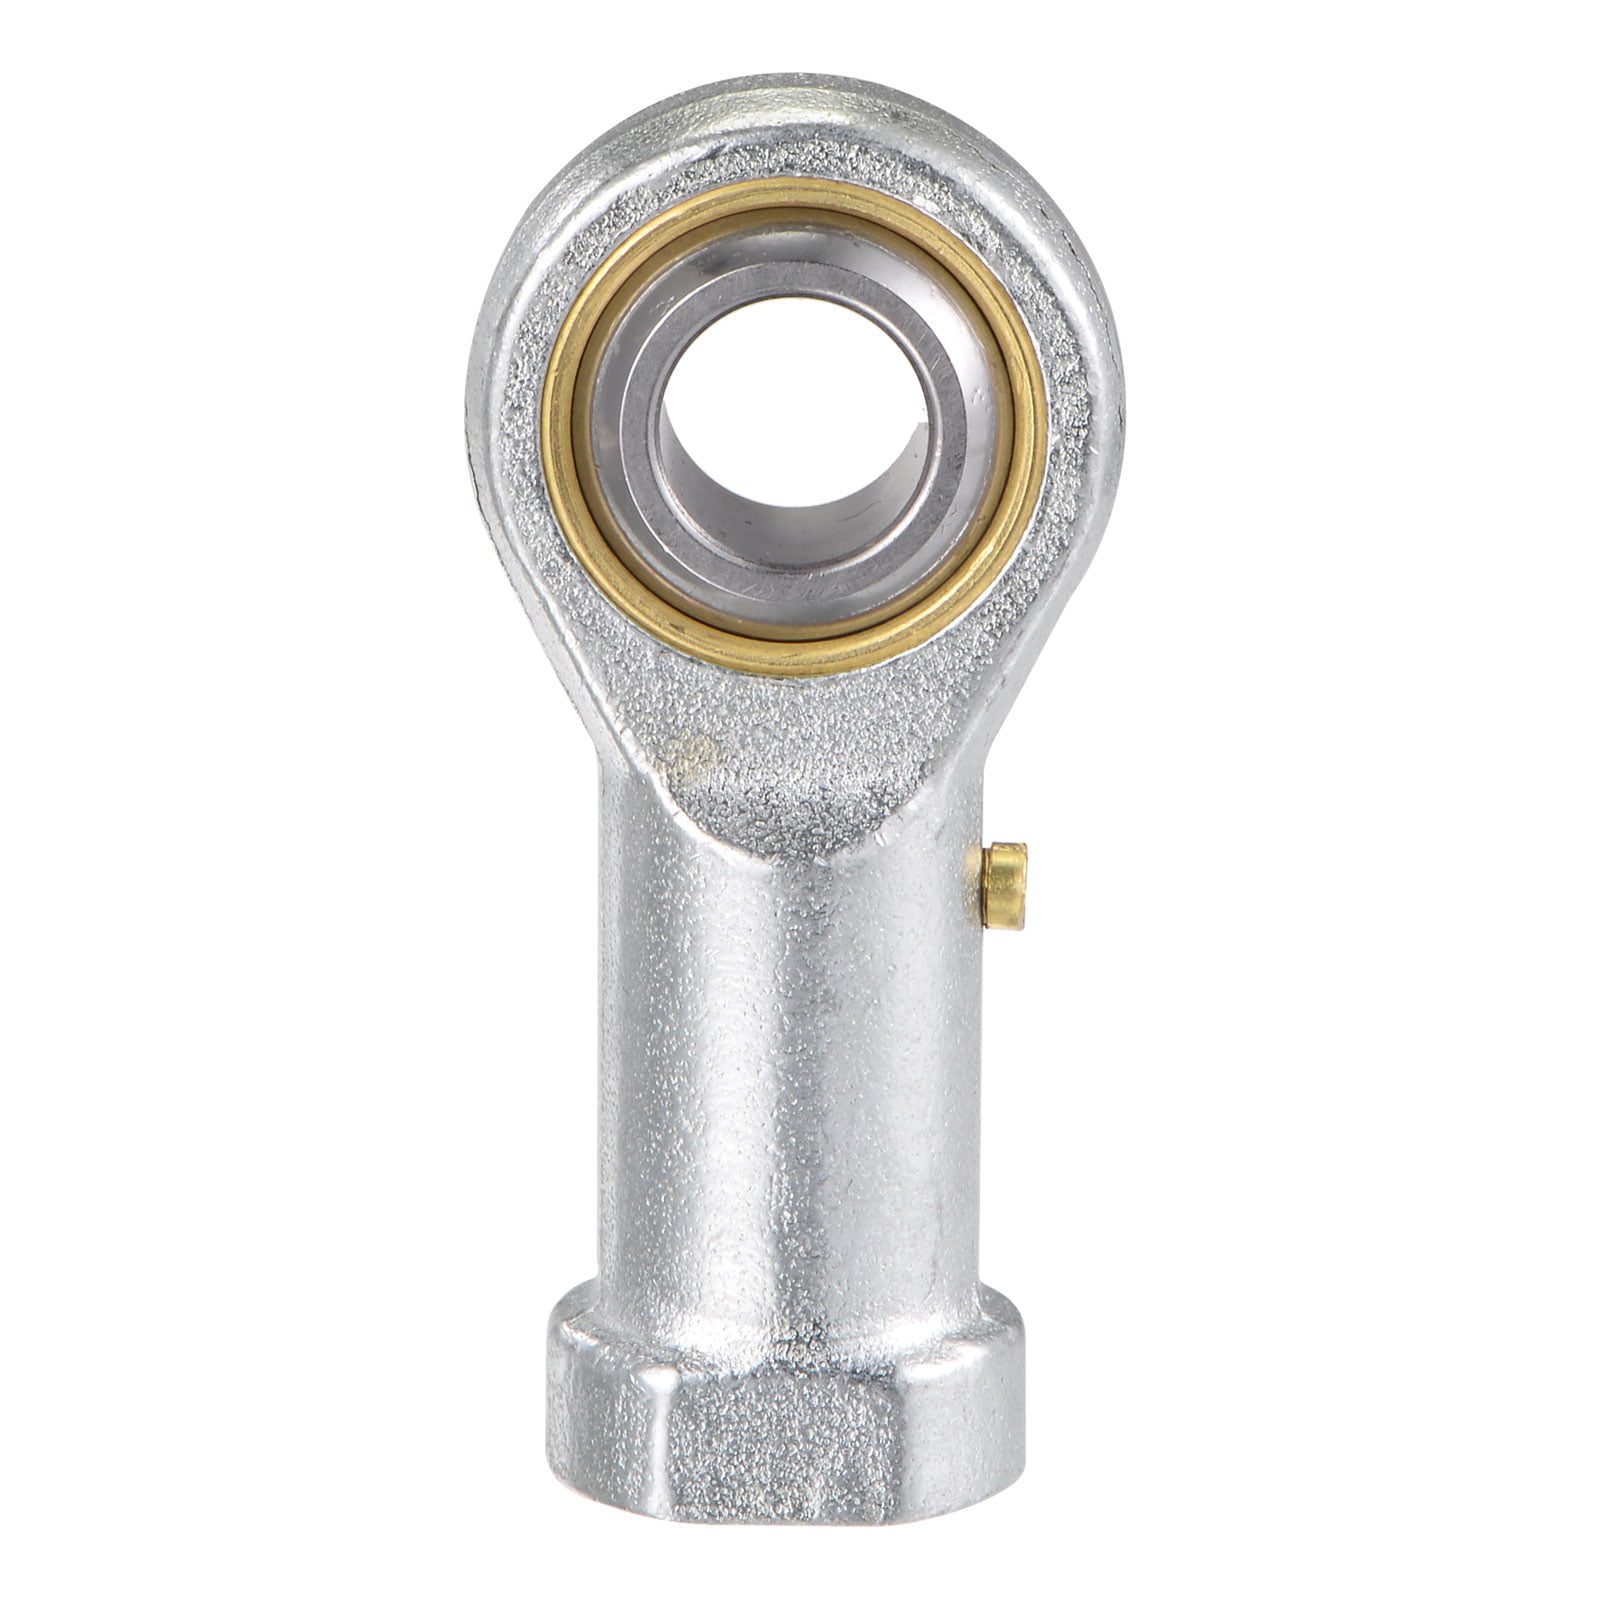 uxcell PHS5 Spherical Rod End Bearing 5mm Bore Self-Lubricated Joint Bearing M5x0.8 Right Hand Female Thread Connector 